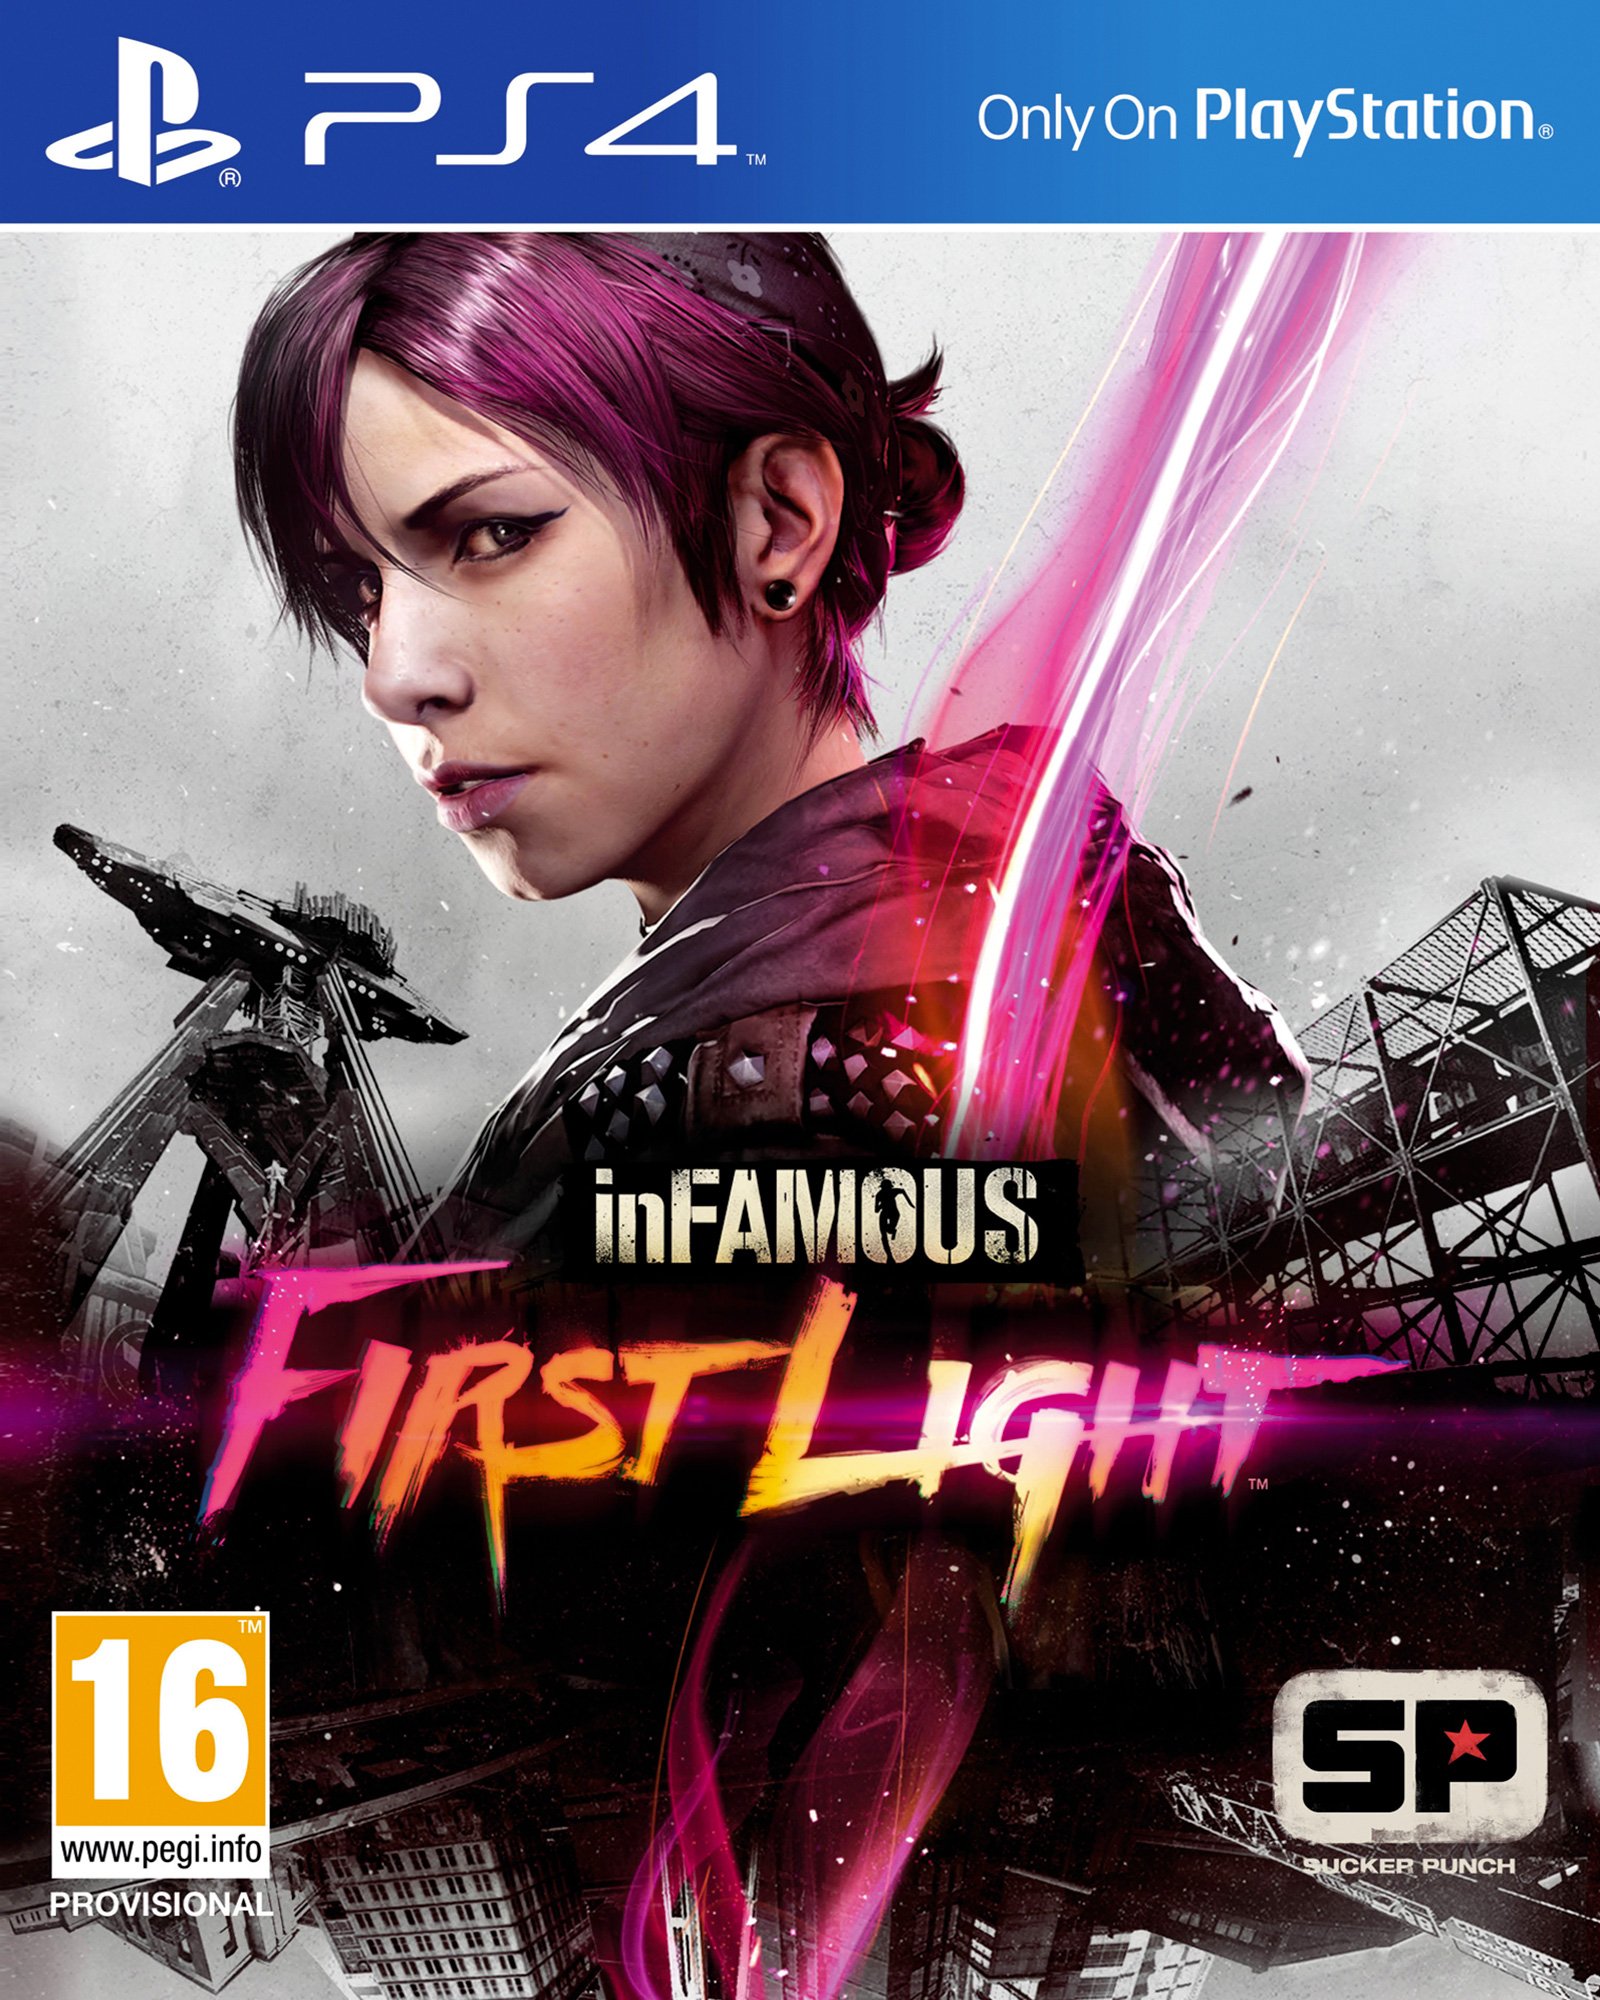 InFamous: First Light [PS4 Exclusive] 5.05 / 6.72 / 7.02 [EUR] (2014) [Русский] (v1.04)